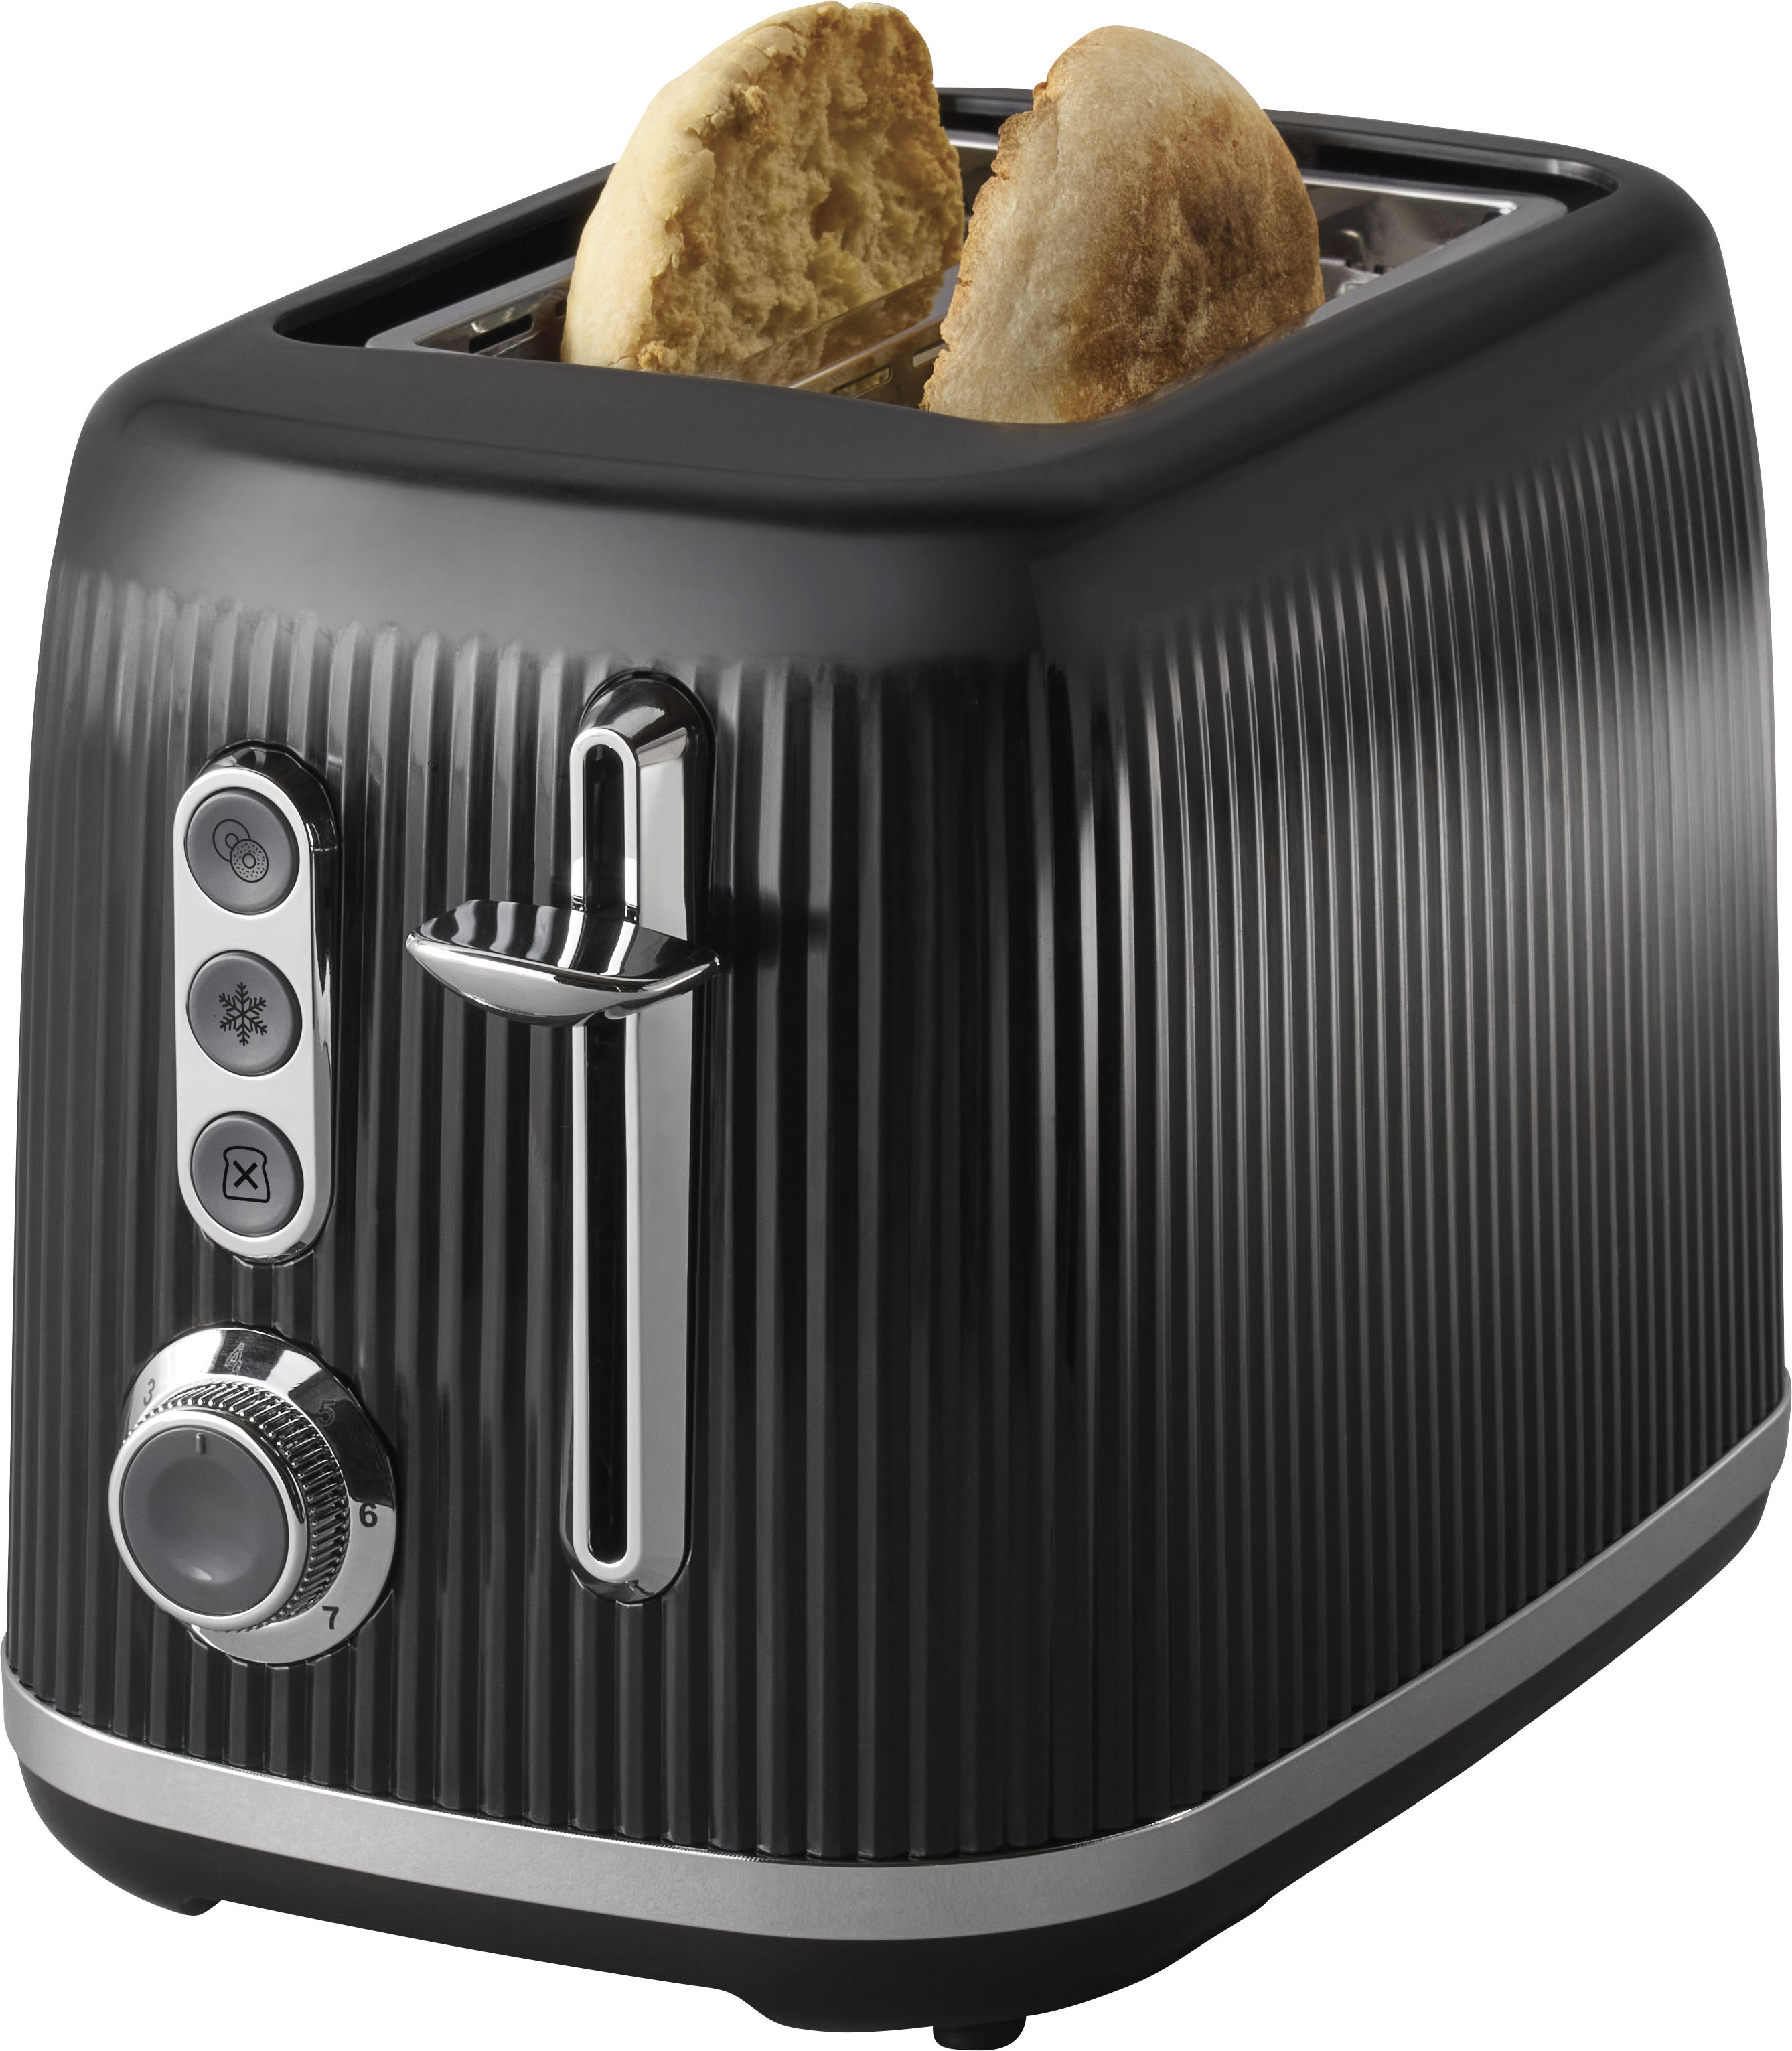  Oster 2 Slice Toaster, Brushed Stainless Steel